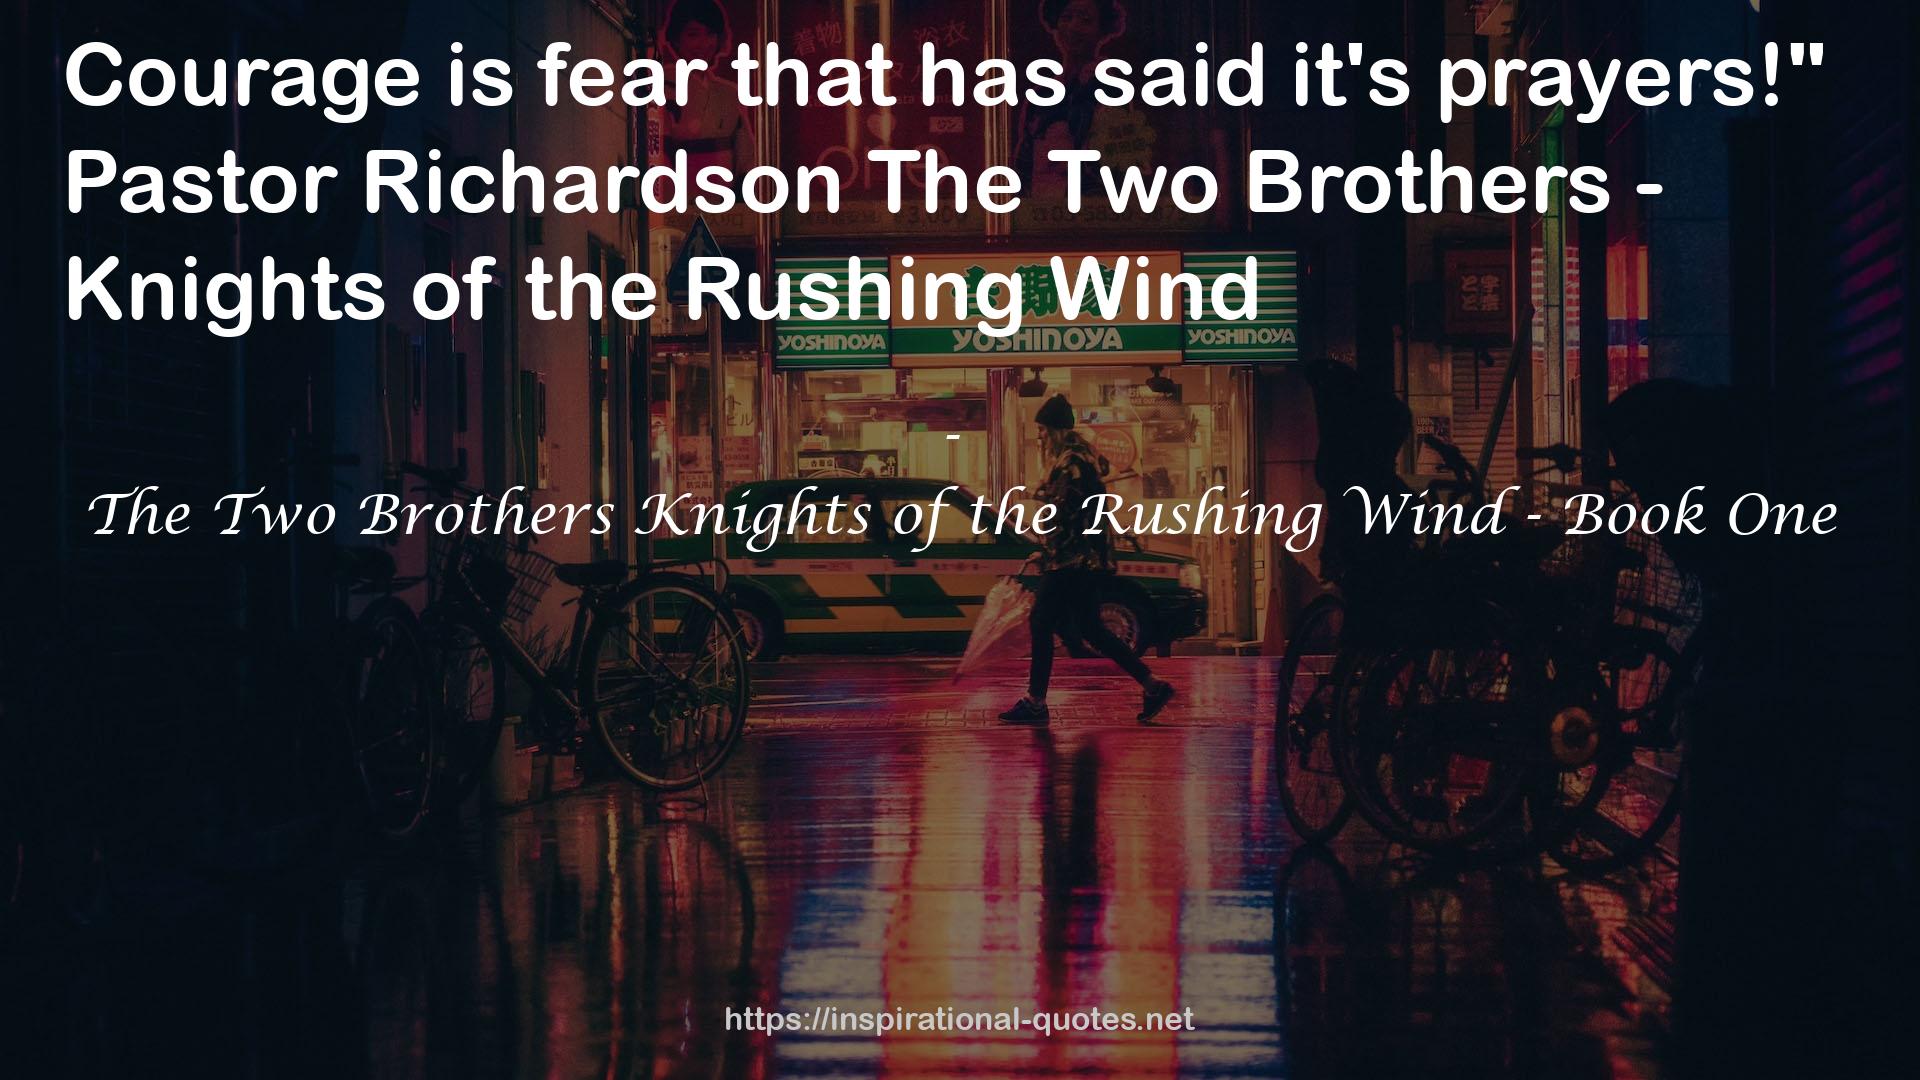 The Two Brothers Knights of the Rushing Wind - Book One QUOTES